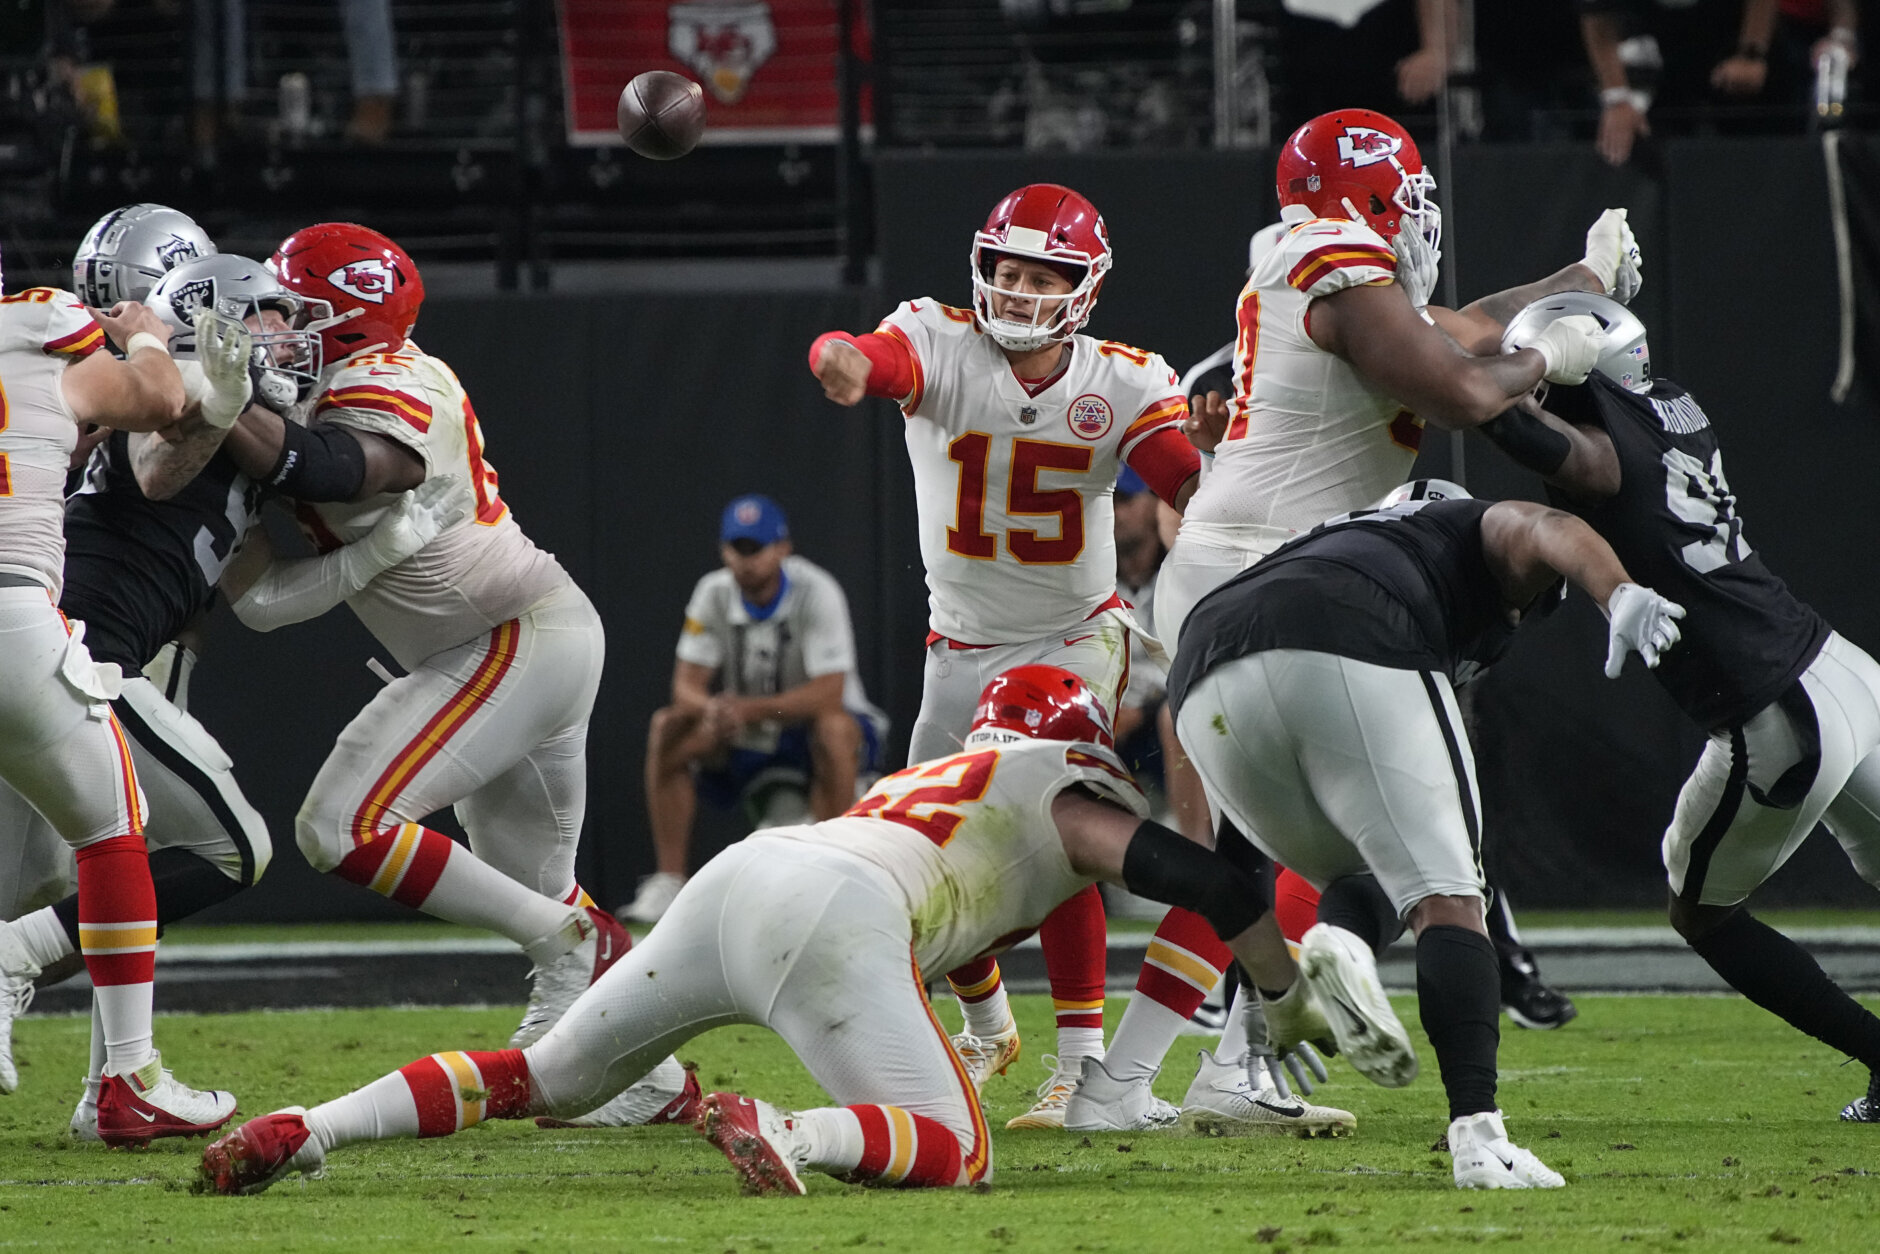 <p><b><i>Chiefs 41</i></b><br />
<b><i>Raiders 14</i></b></p>
<p>Now that&#8217;s the Kansas City Chiefs we know and fear.</p>
<p><a href="https://www.kansascity.com/sports/nfl/kansas-city-chiefs/article255699911.html" target="_blank" rel="noopener">Patrick Mahomes said he was going to take his shots</a>, and boy did he, <a href="https://twitter.com/ESPNStatsInfo/status/1460104459057565704?s=20" target="_blank" rel="noopener">matching Hall of Fame legends</a> with his third career 400-yard, 5-TD game to help Andy Reid pass Curly Lambeau for fifth on the all-time coaching wins list. Heaven help us all if Mahomes goes on a hot streak.</p>
